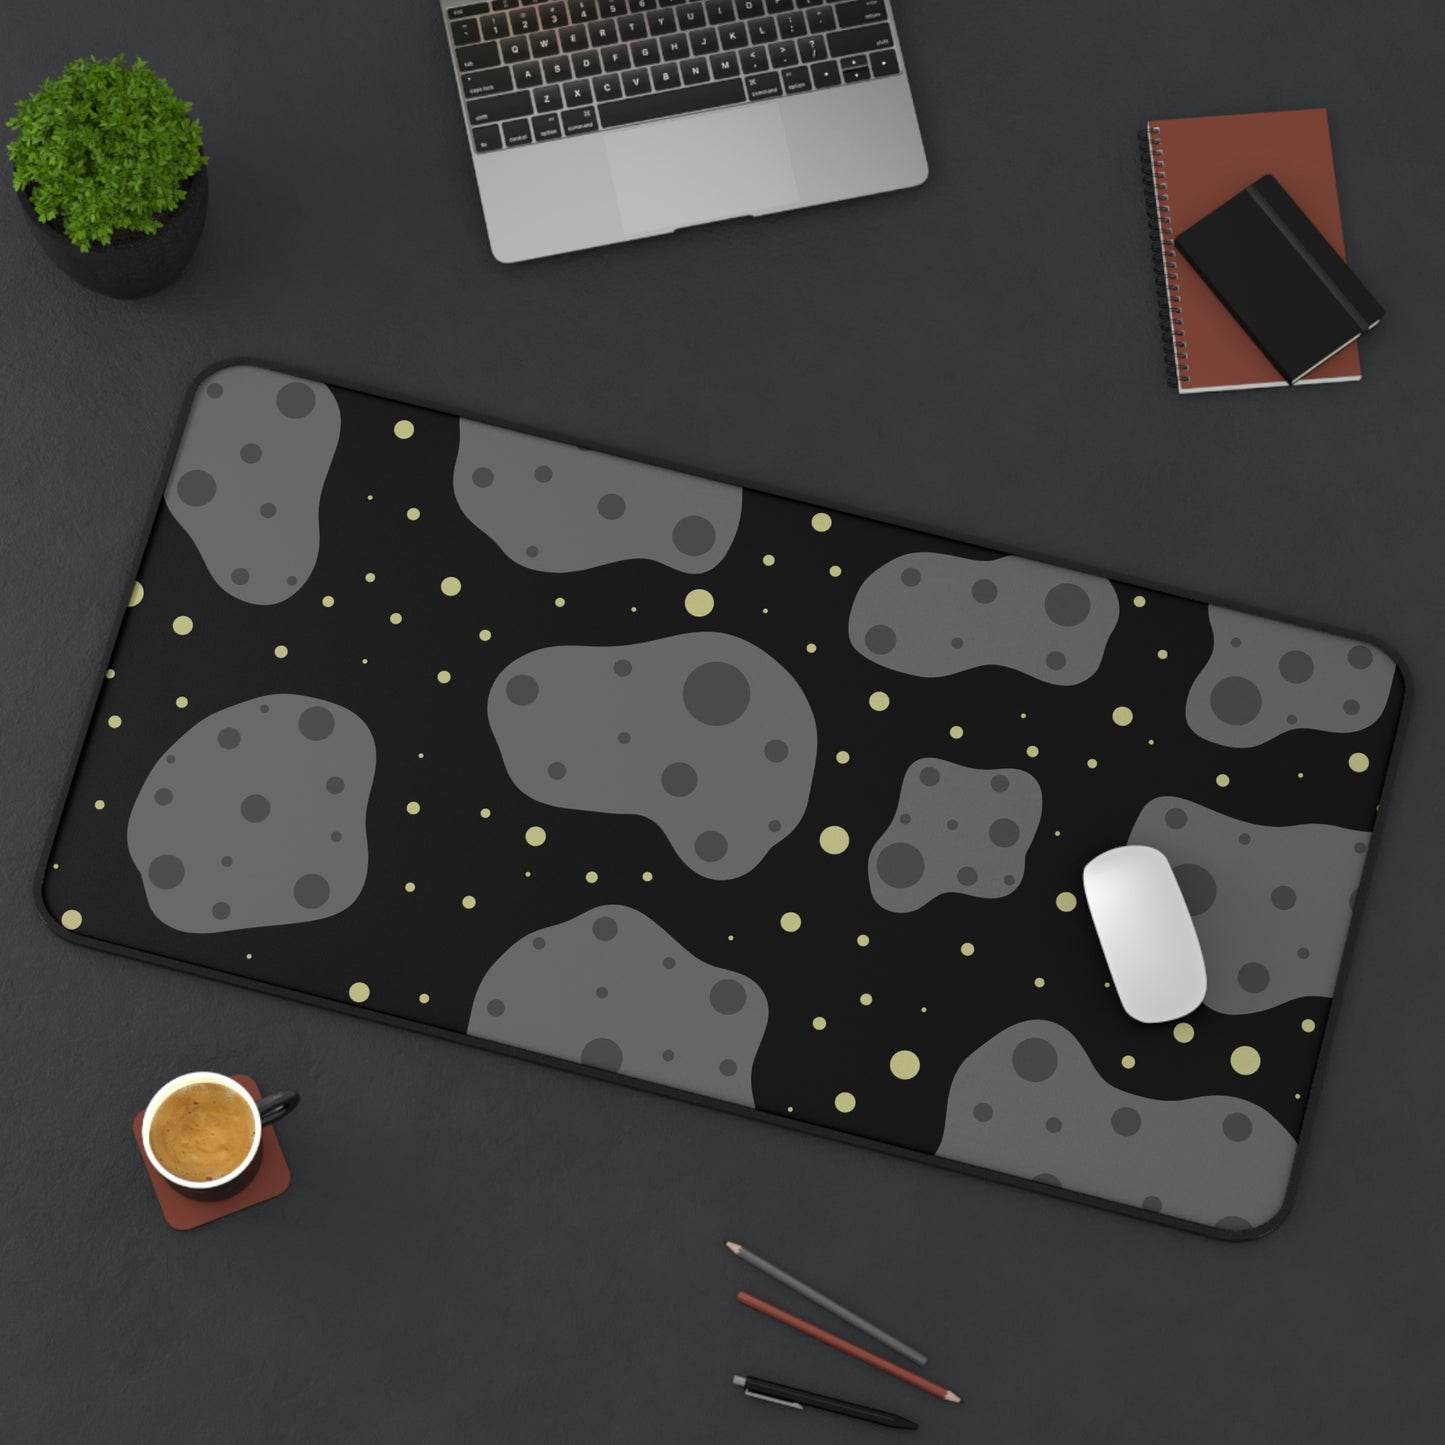 A 31" x 15.5" desk mat with a black background, gray asteroids, and yellow stars sitting at an angle.